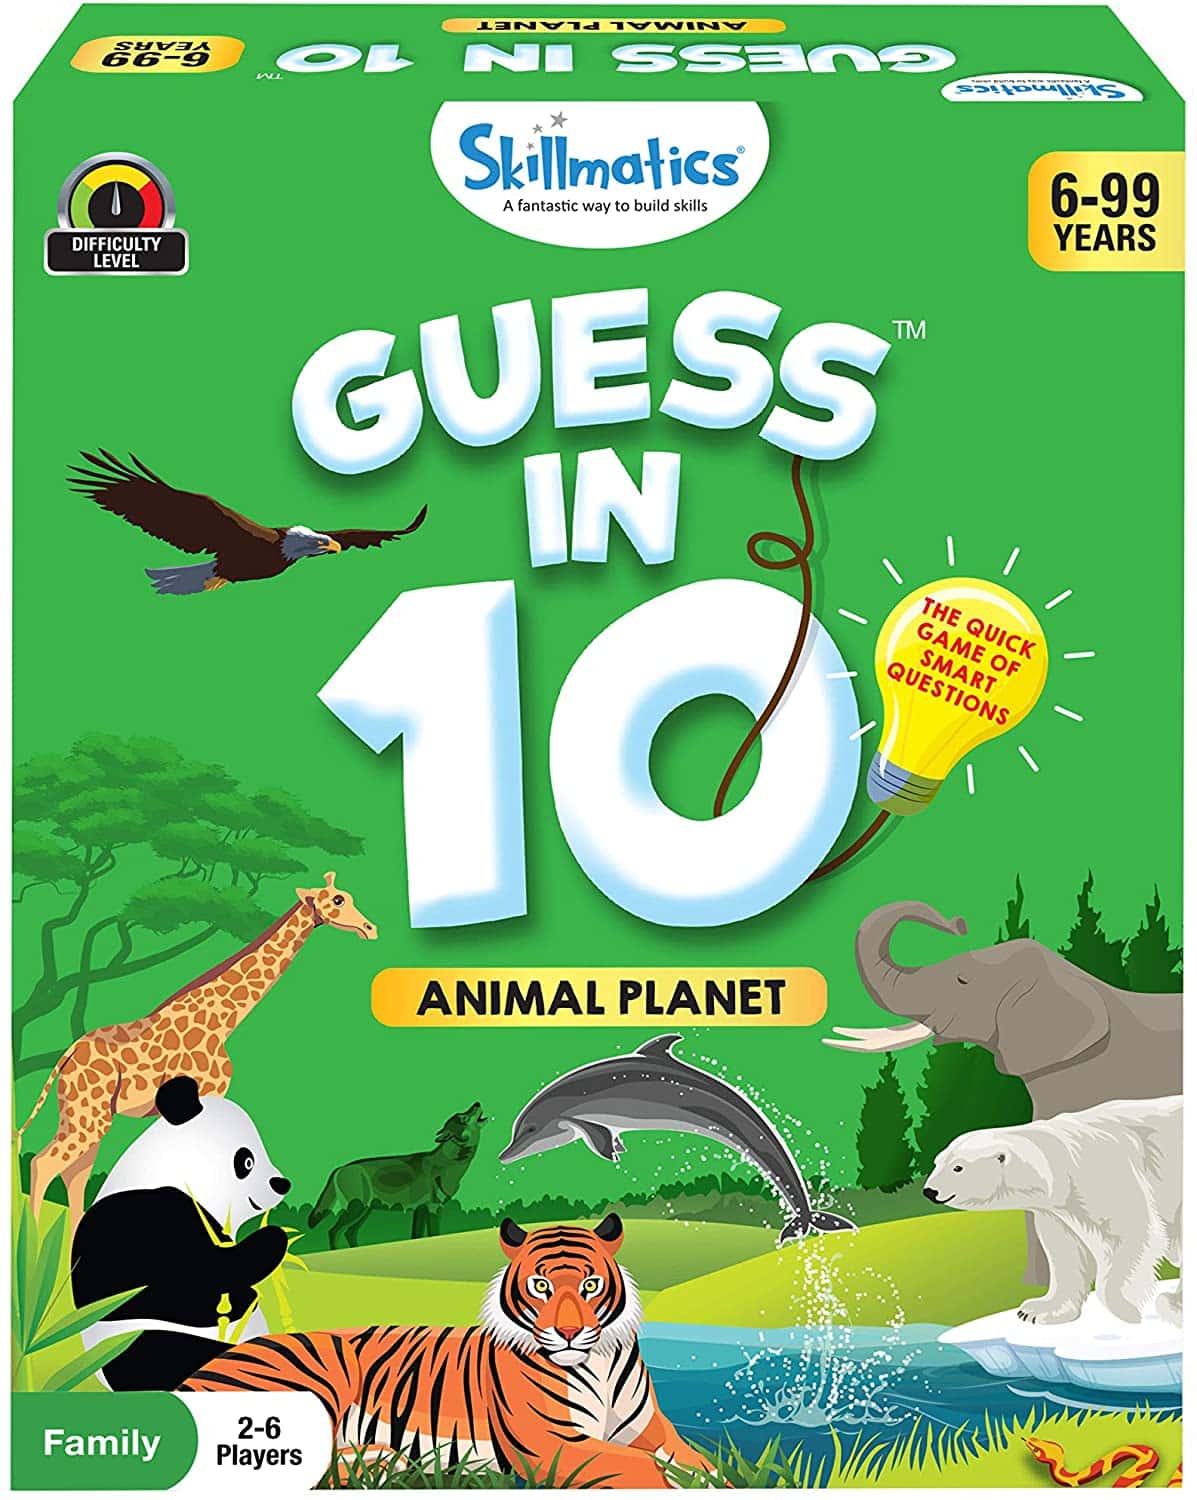 Guess in 10 Animal Planet game from Skillmatics